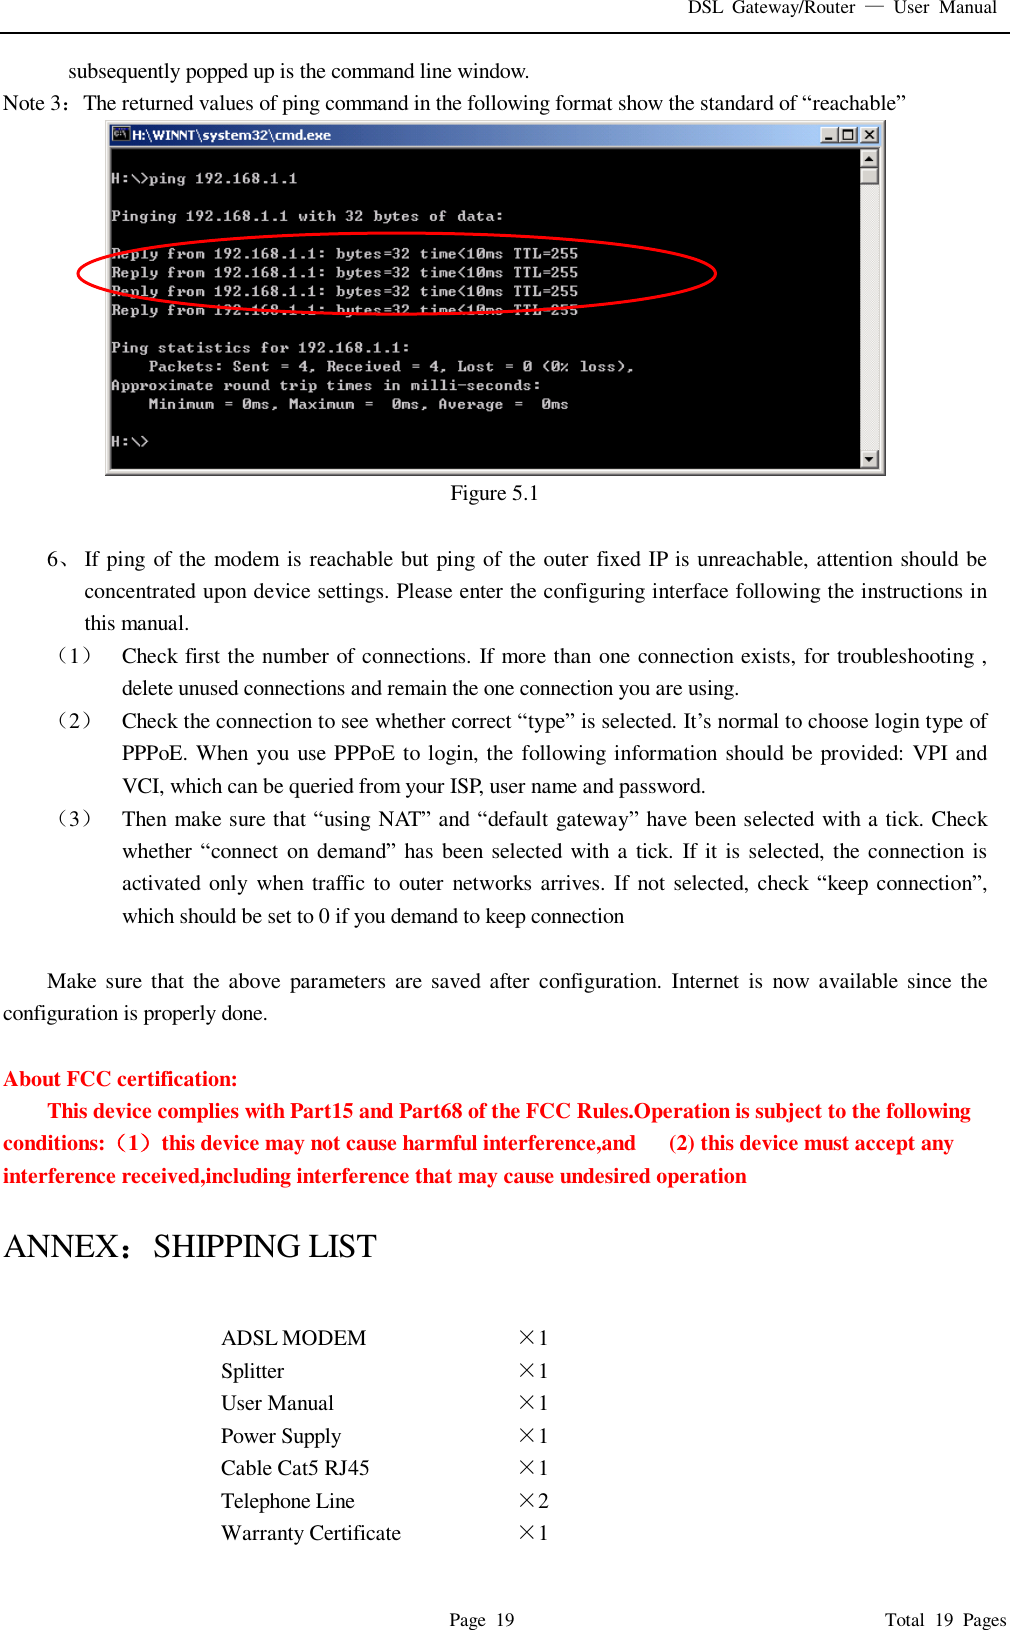 DSL Gateway/Router  — User Manual  Page 19                                       Total 19 Pages subsequently popped up is the command line window. Note 3：The returned values of ping command in the following format show the standard of “reachable”  Figure 5.1  6、 If ping of the modem is reachable but ping of the outer fixed IP is unreachable, attention should be concentrated upon device settings. Please enter the configuring interface following the instructions in this manual. （1） Check first the number of connections. If more than one connection exists, for troubleshooting , delete unused connections and remain the one connection you are using. （2） Check the connection to see whether correct “type” is selected. It’s normal to choose login type of PPPoE. When you use PPPoE to login, the following information should be provided: VPI and VCI, which can be queried from your ISP, user name and password. （3） Then make sure that “using NAT” and “default gateway” have been selected with a tick. Check whether “connect on demand” has been selected with a tick. If it is selected, the connection is activated only when traffic to outer networks arrives. If not selected, check  “keep connection”, which should be set to 0 if you demand to keep connection  Make sure that the above parameters are saved after configuration. Internet is now available since the configuration is properly done.  About FCC certification:  This device complies with Part15 and Part68 of the FCC Rules.Operation is subject to the following conditions:（1）this device may not cause harmful interference,and   (2) this device must accept any interference received,including interference that may cause undesired operation  ANNEX：SHIPPING LIST  ADSL MODEM  ×1  Splitter  ×1  User Manual  ×1  Power Supply  ×1  Cable Cat5 RJ45  ×1  Telephone Line  ×2  Warranty Certificate  ×1  